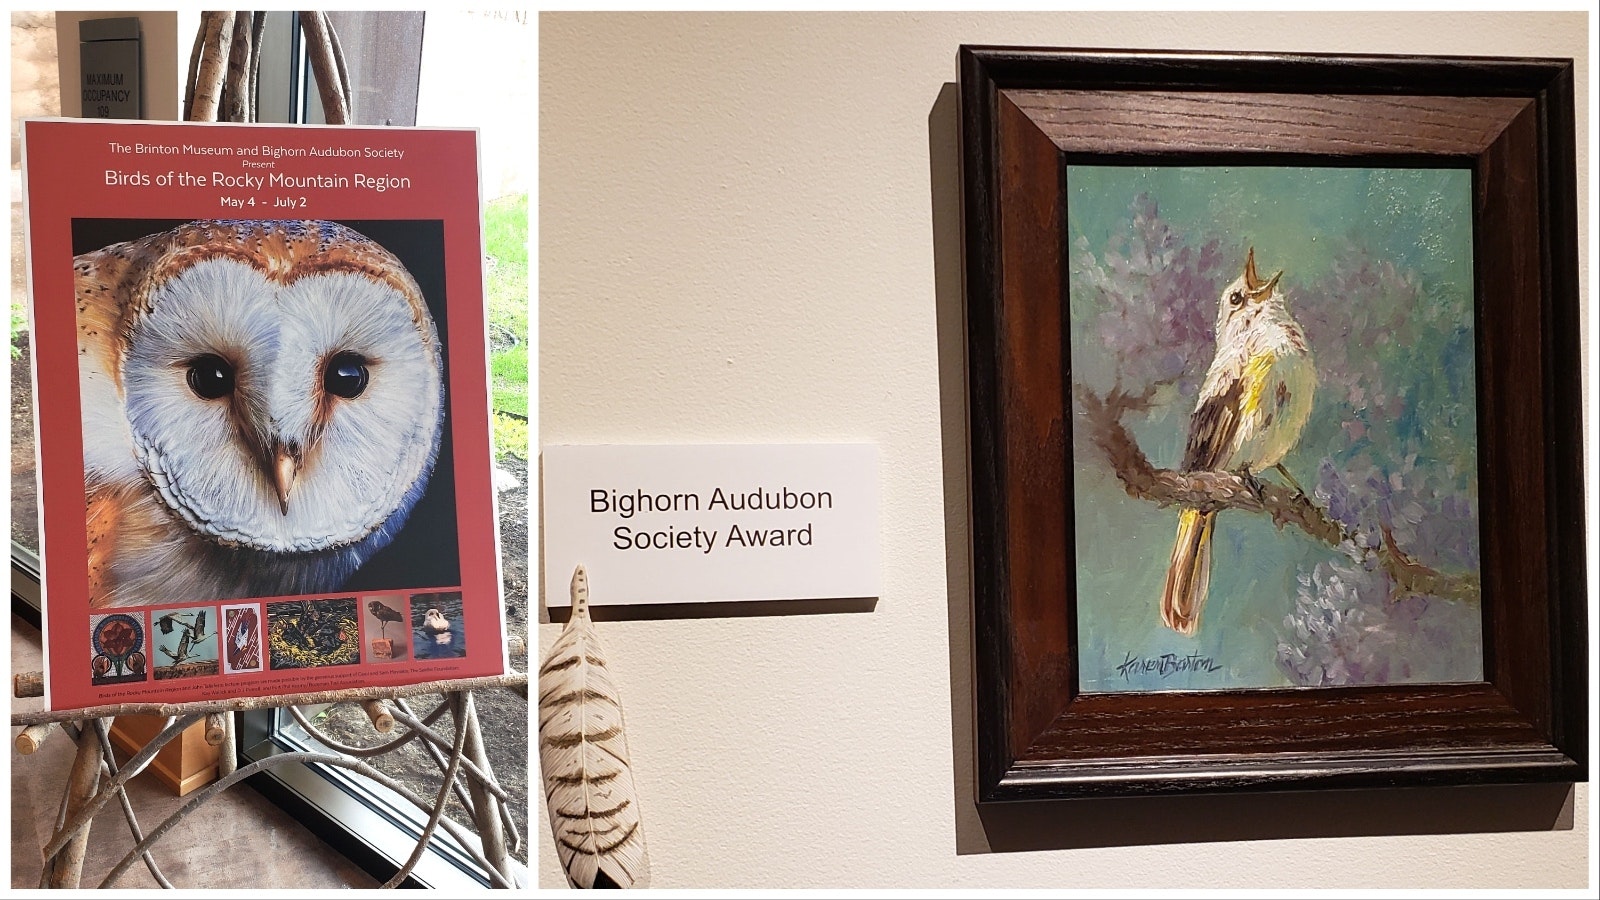 The Brinton Museum in Big Horn is hosing "Birds of the Rockies" through July 2. This painting of an American redstart, right, is part of the display.